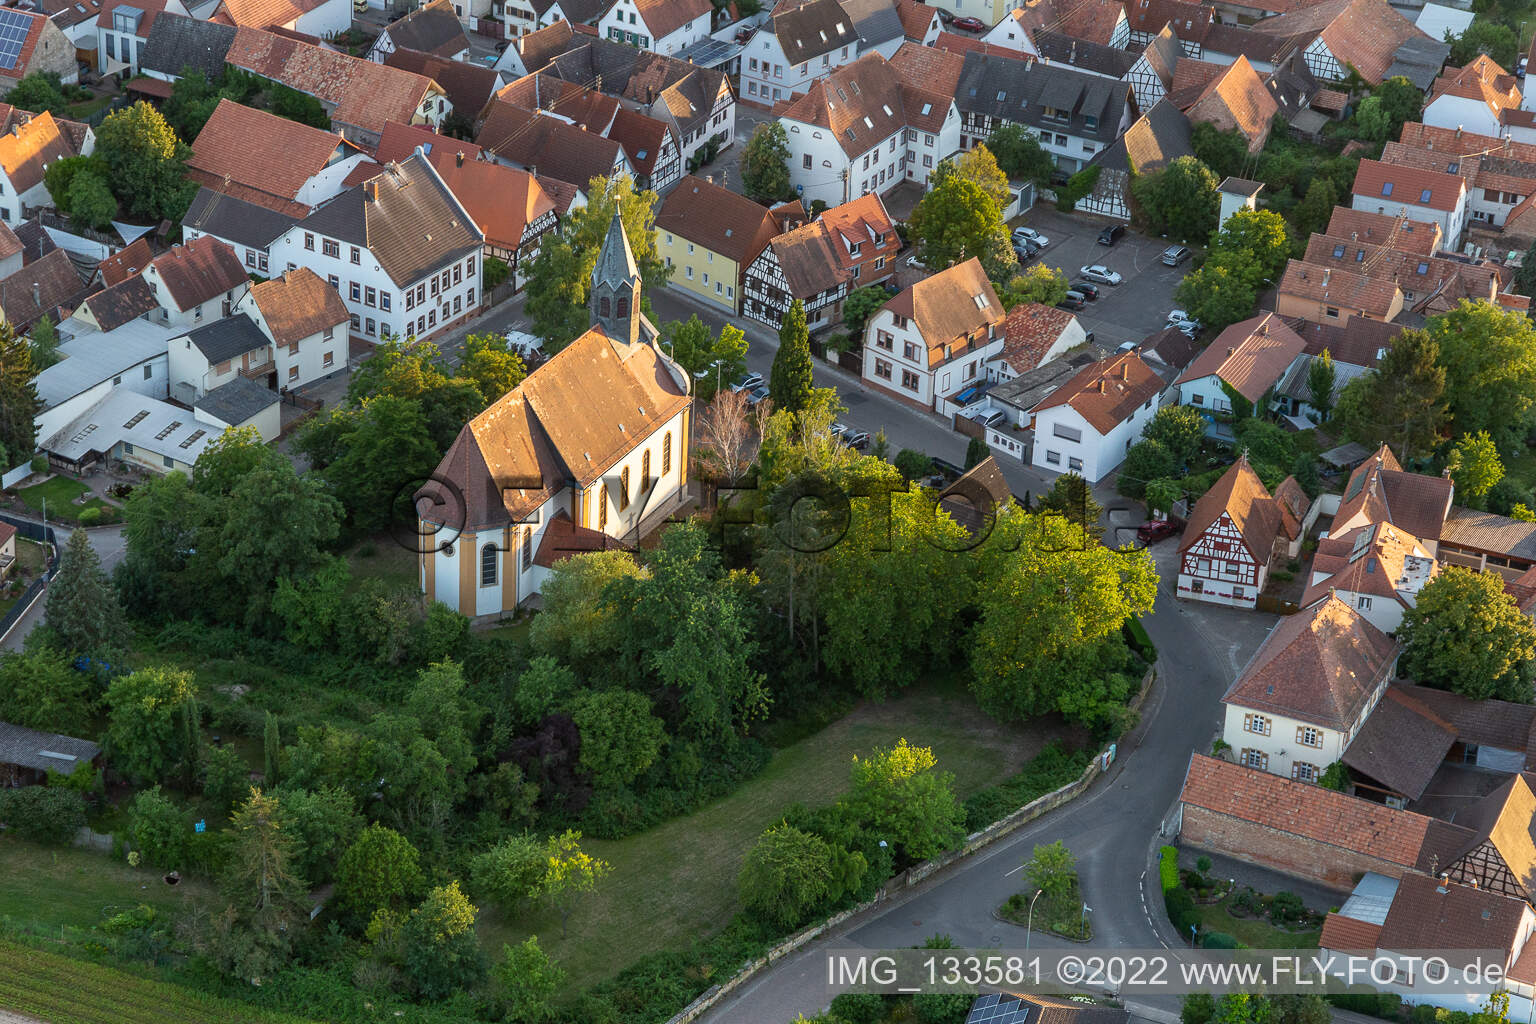 Aerial view of St. Bartholomew in Zeiskam in the state Rhineland-Palatinate, Germany